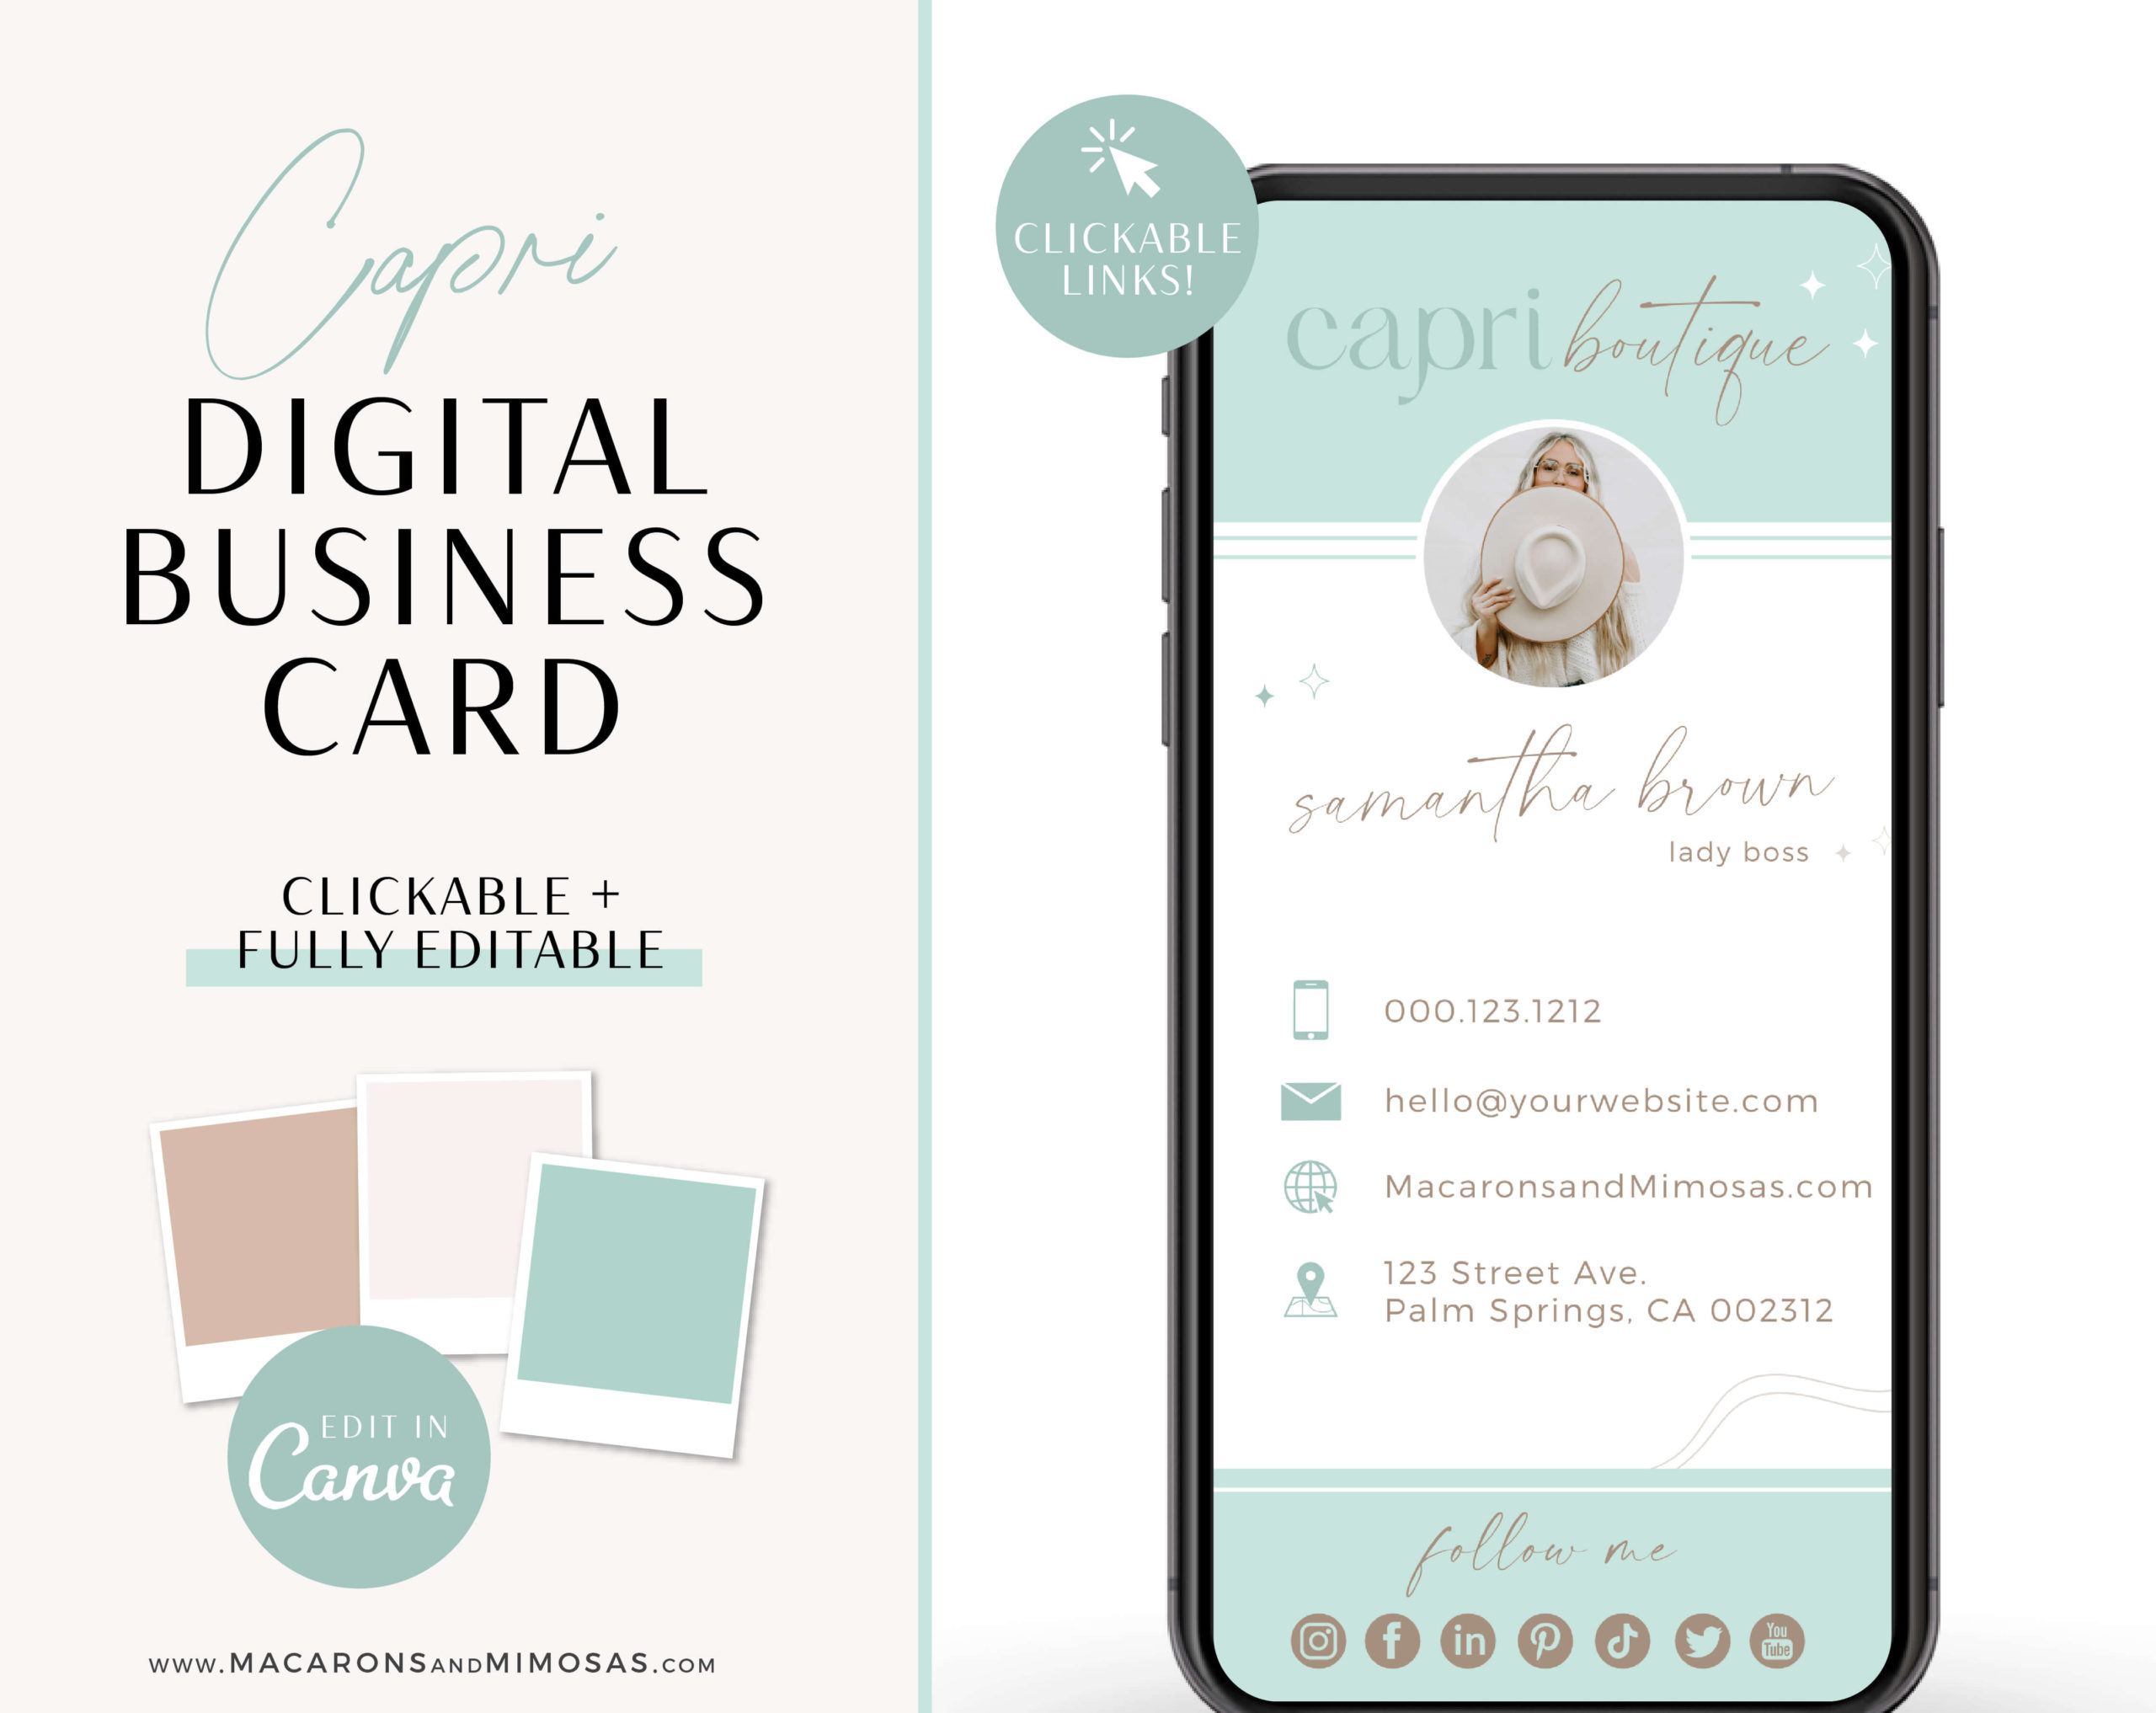 digital business card design template with clickable links, How to create DIY Modern Minimalist blue teal Real Estate Digital Business Card